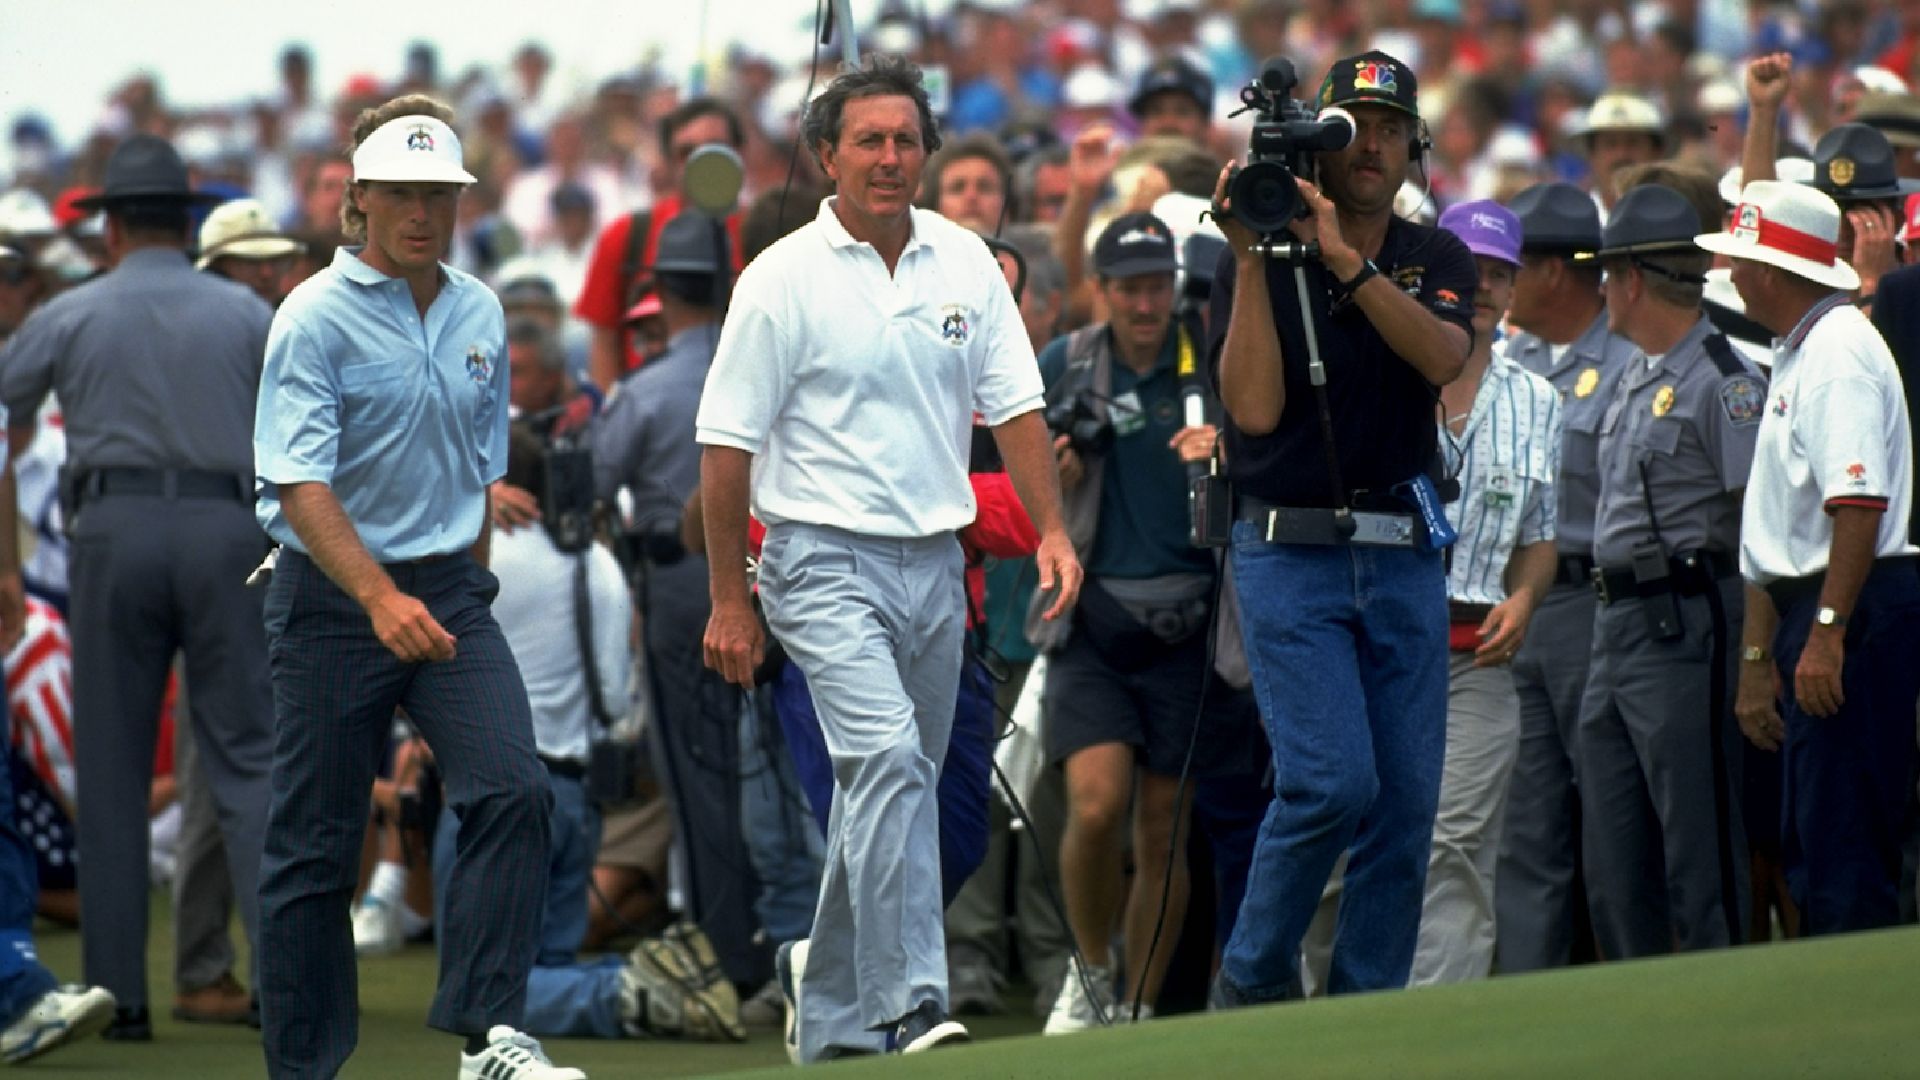 Remembering the 1991 Ryder Cup's dramatic finish